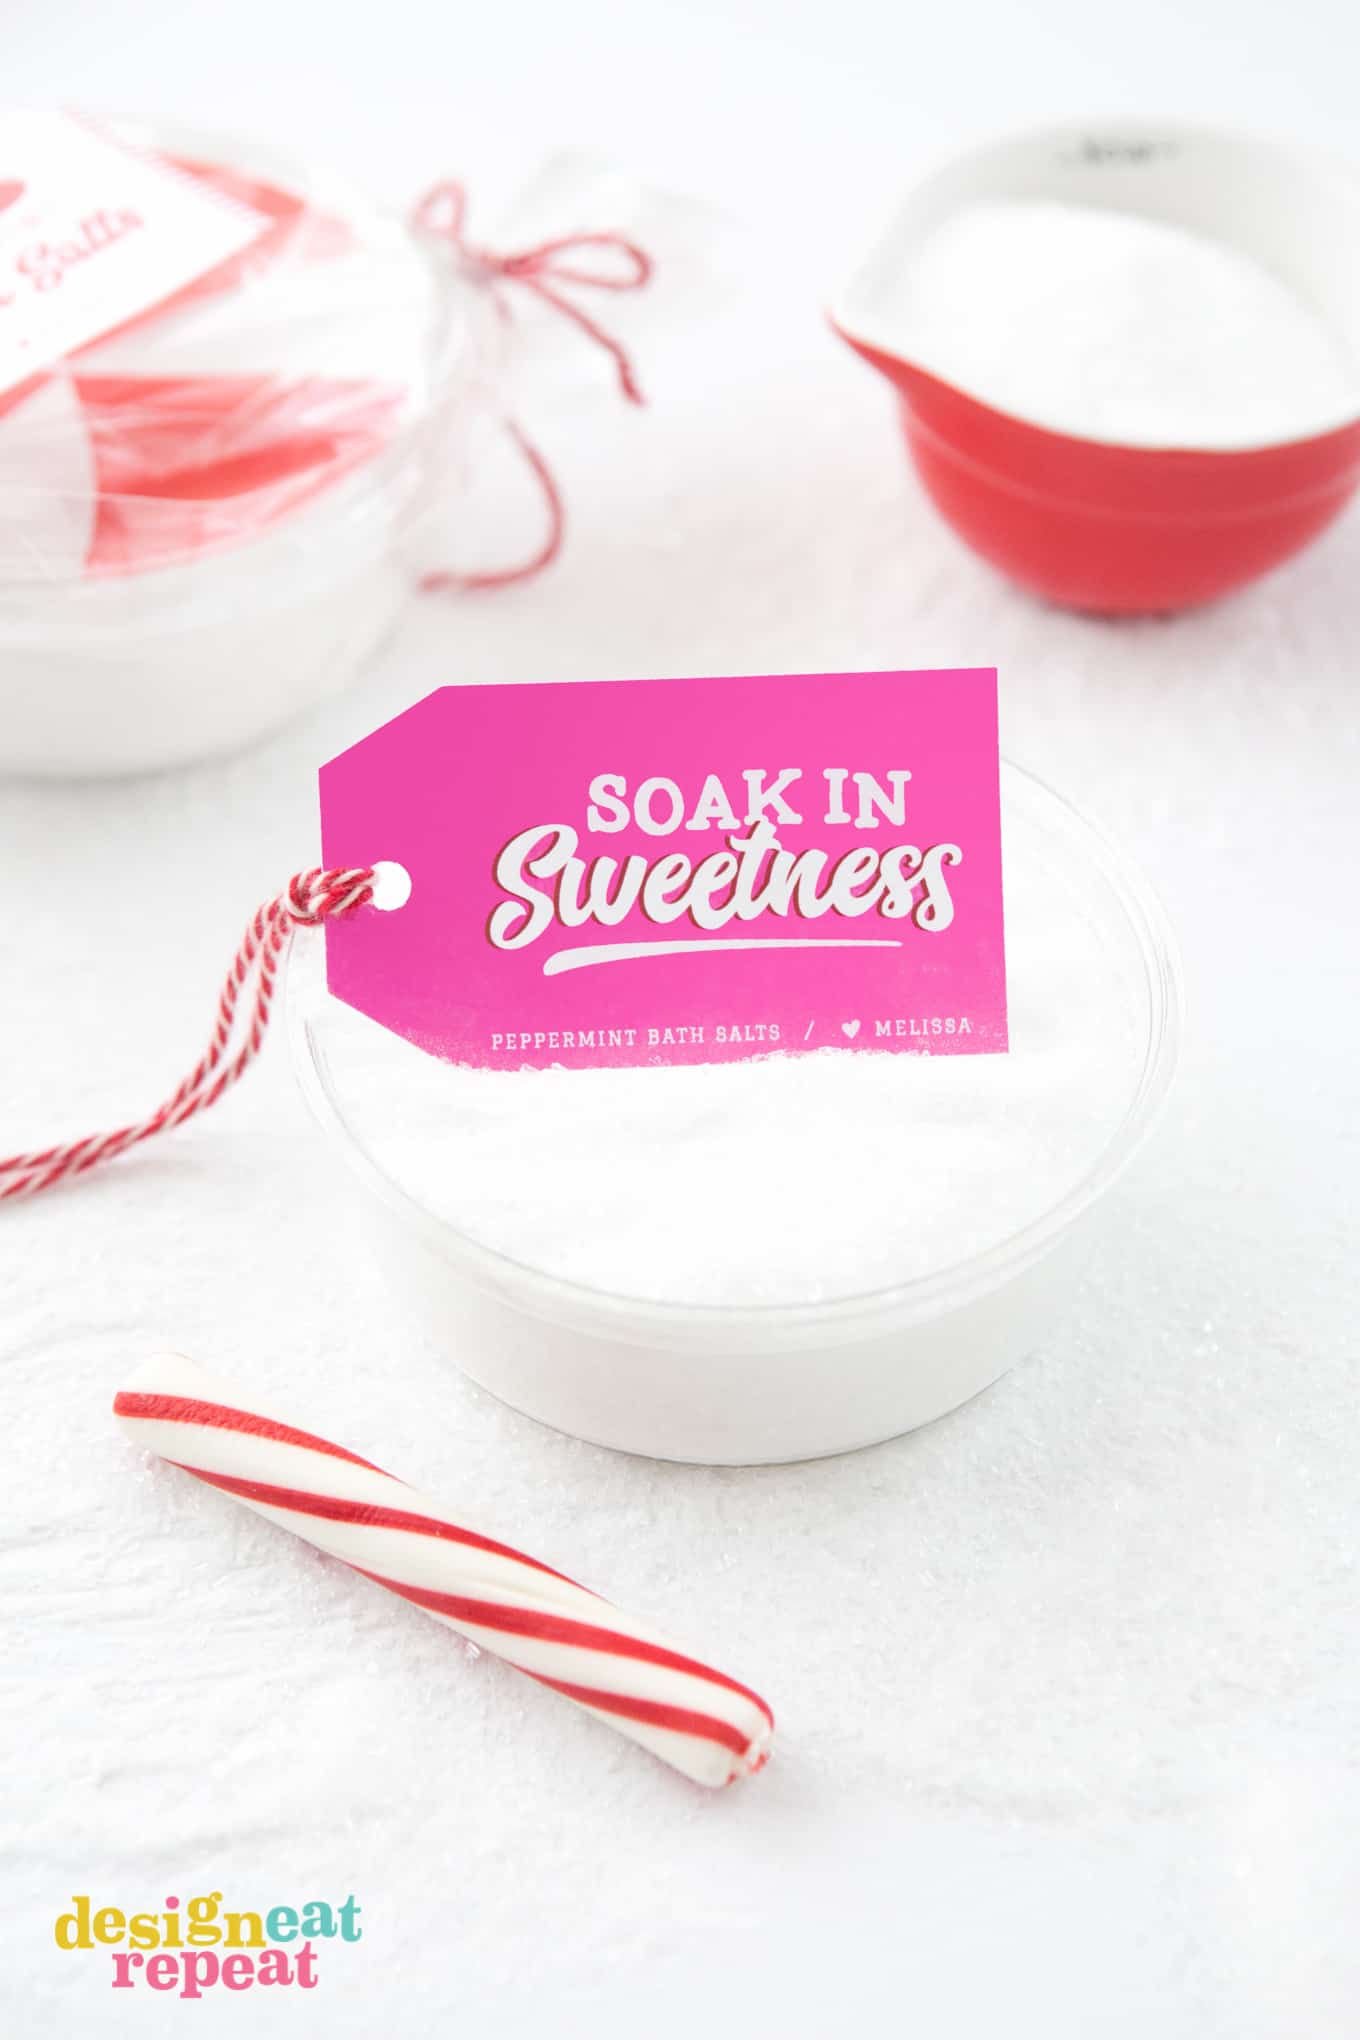 Learn how to mix up a batch of Peppermint DIY Bath Salt and pair it with these free printable gift tags for homemade holiday gifts your friends & family will love!